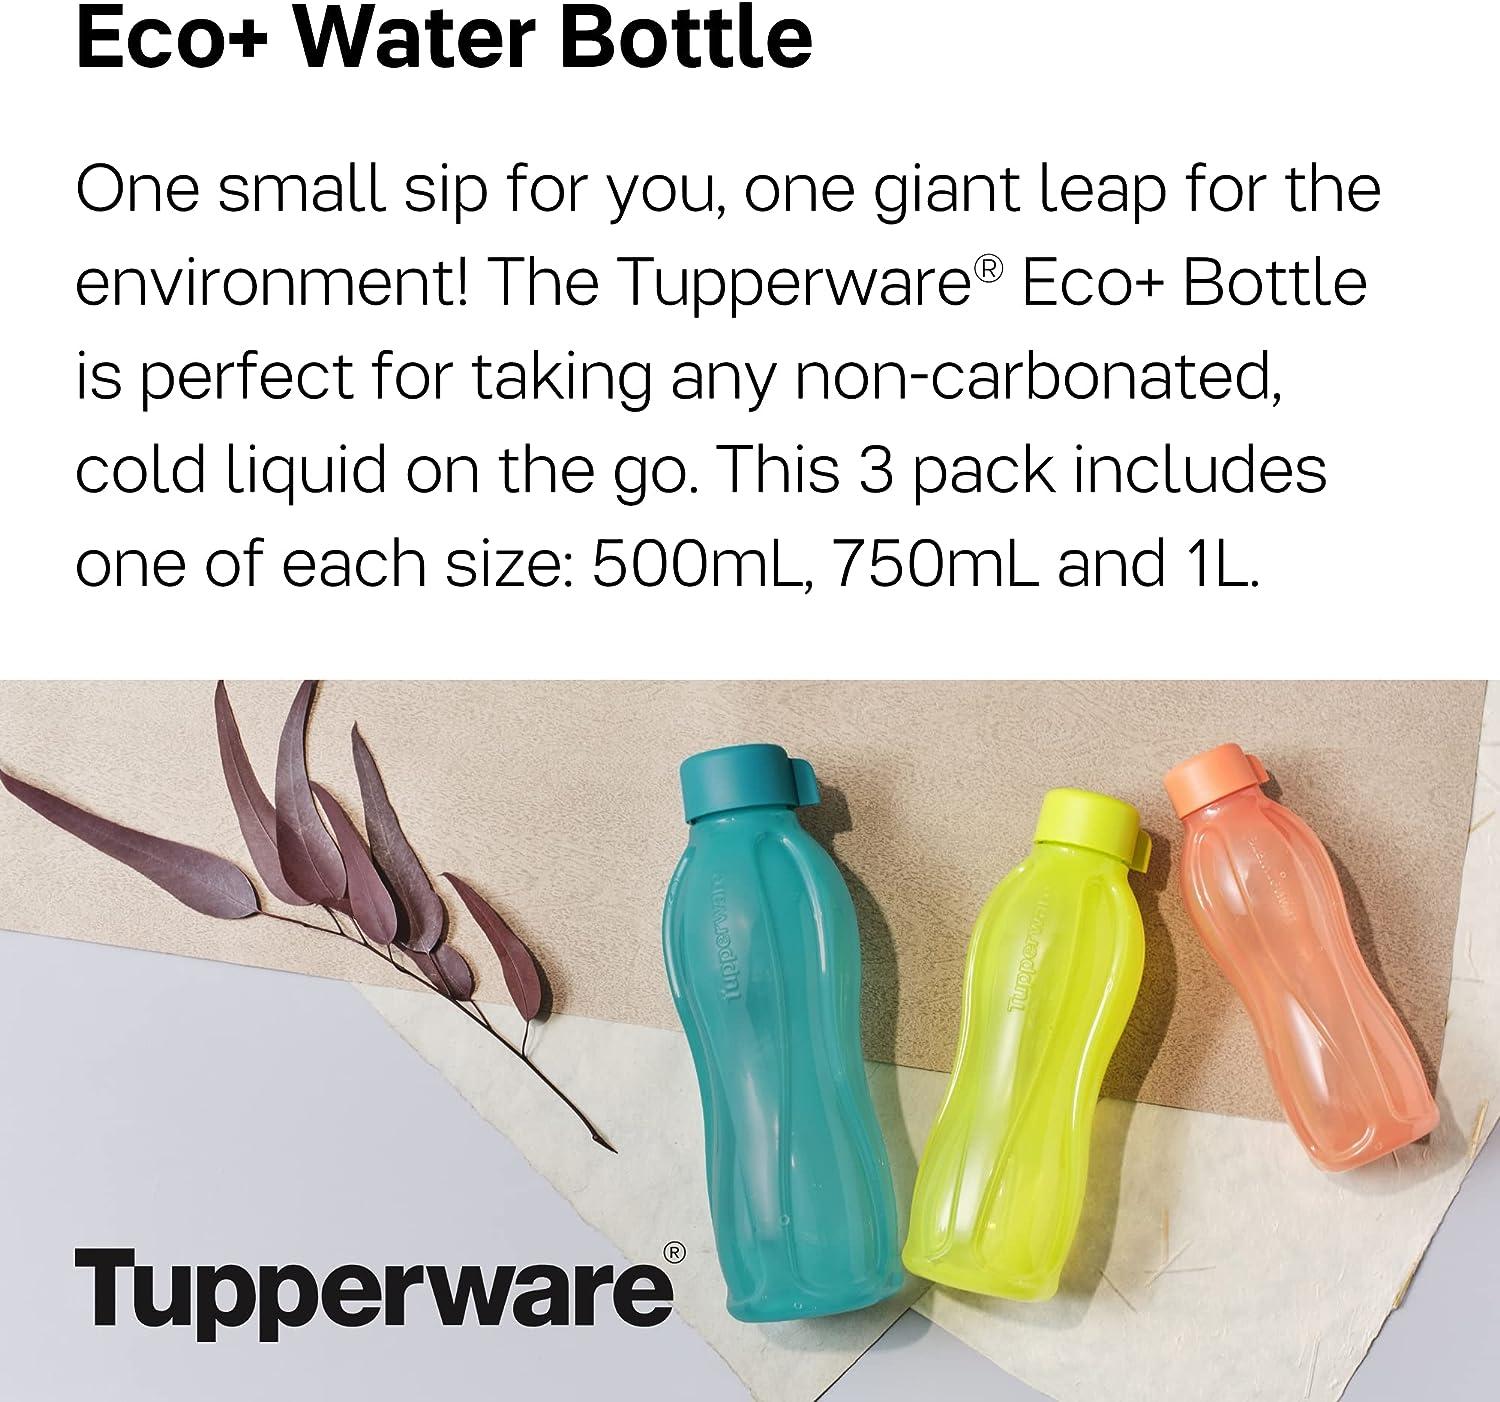 Tupperware Brand Eco+ Small Reusable Water Bottle - 500ml, Pack of 5 - Dishwasher Safe & BPA Free - Lightweight & Leak Proof - Great for Travel, Gym